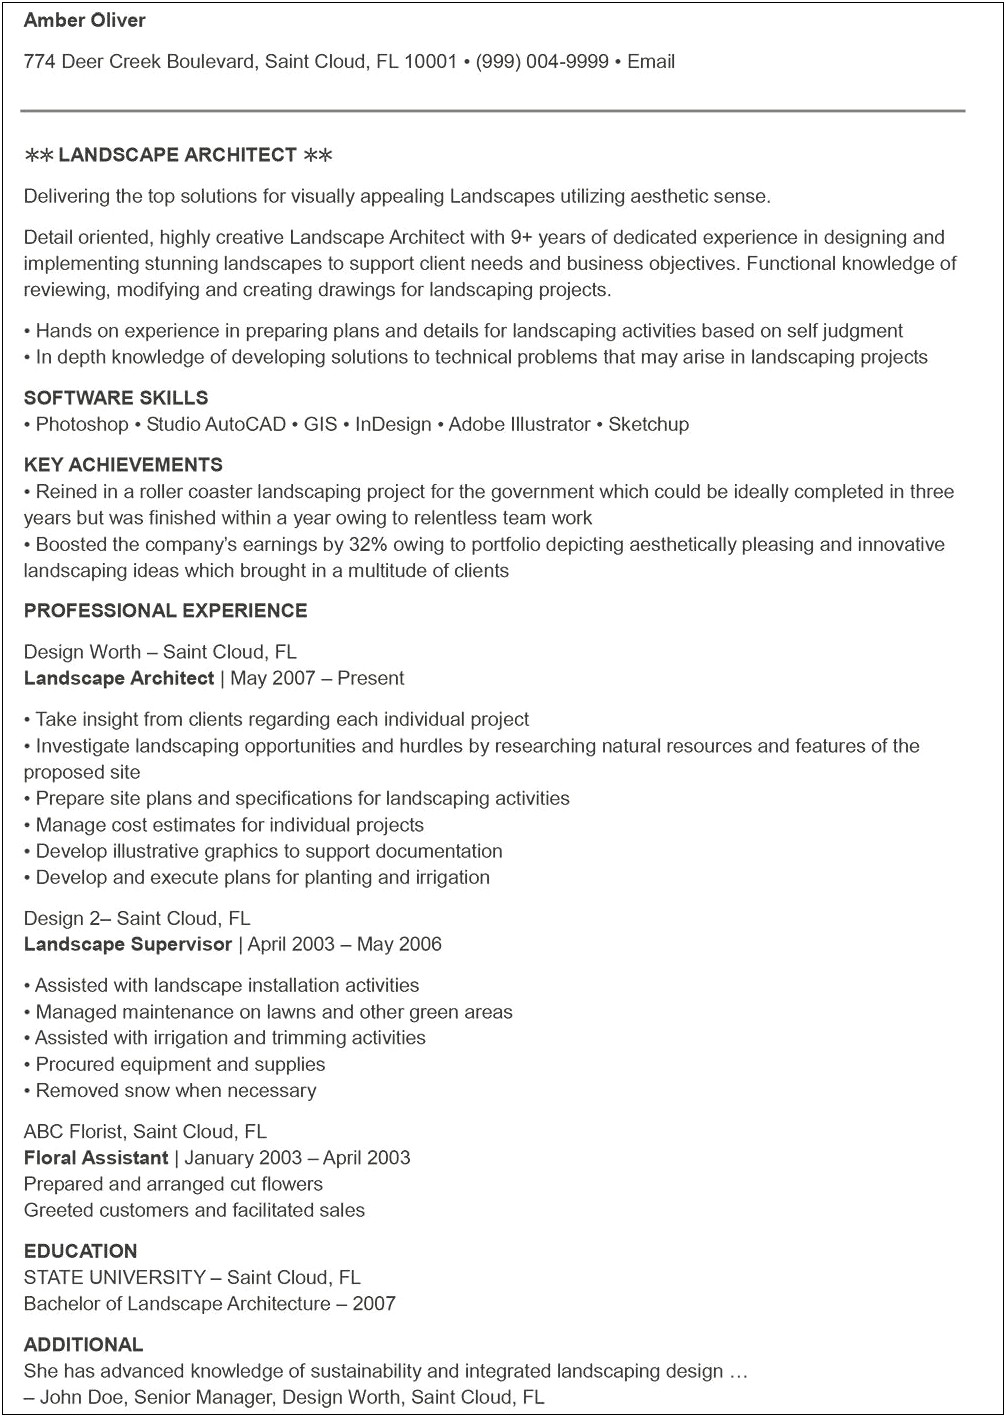 Landscaping Job Work Experience Resume